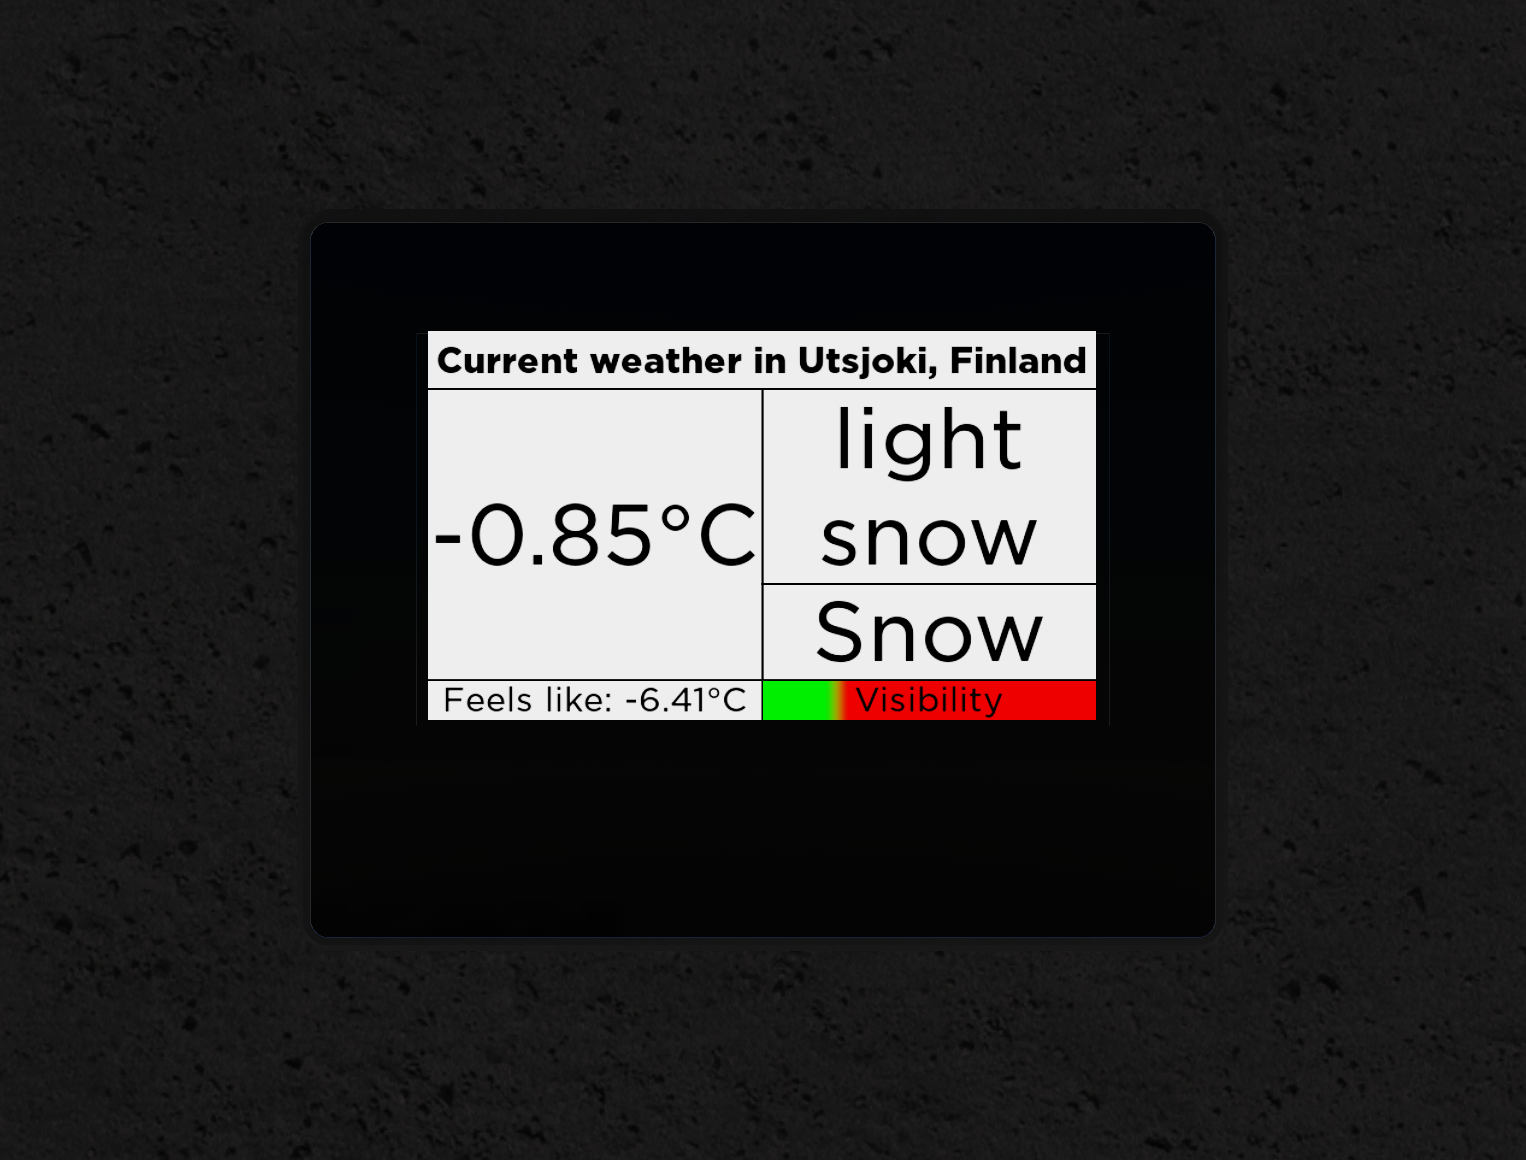 A weather screen showing the weather in Utsjoki, Finland including temperature, feels like temperature, rain and visibility